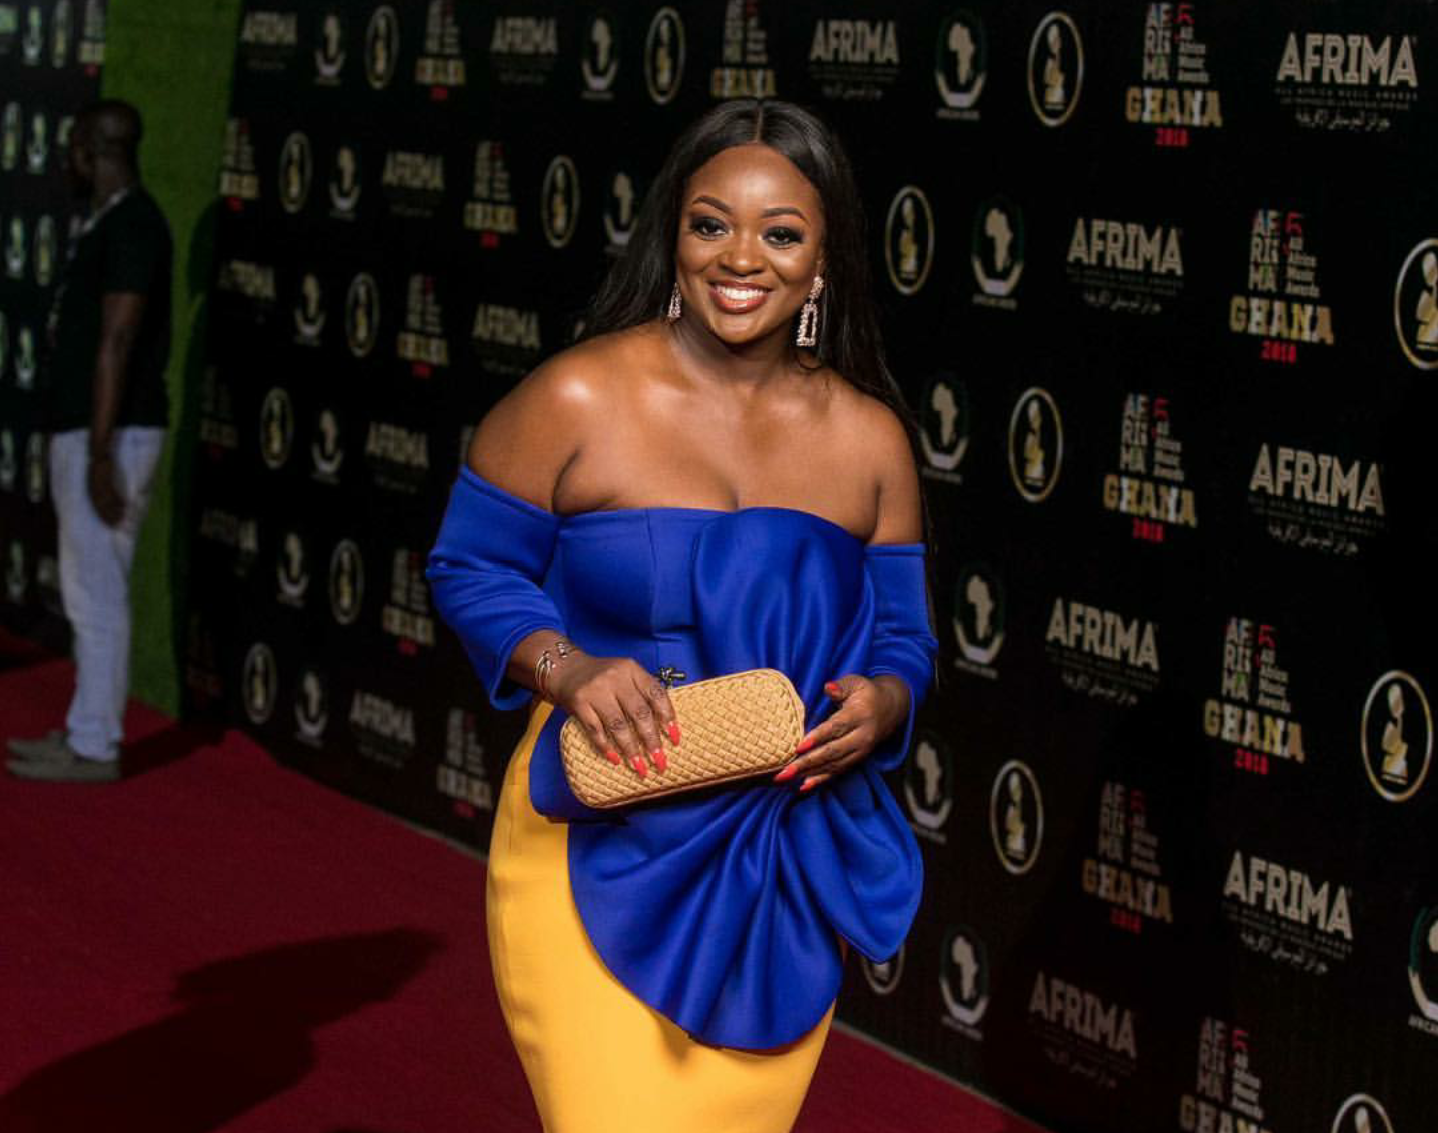 Jackie Appiah slaying the red carpet at the 5thAfrima